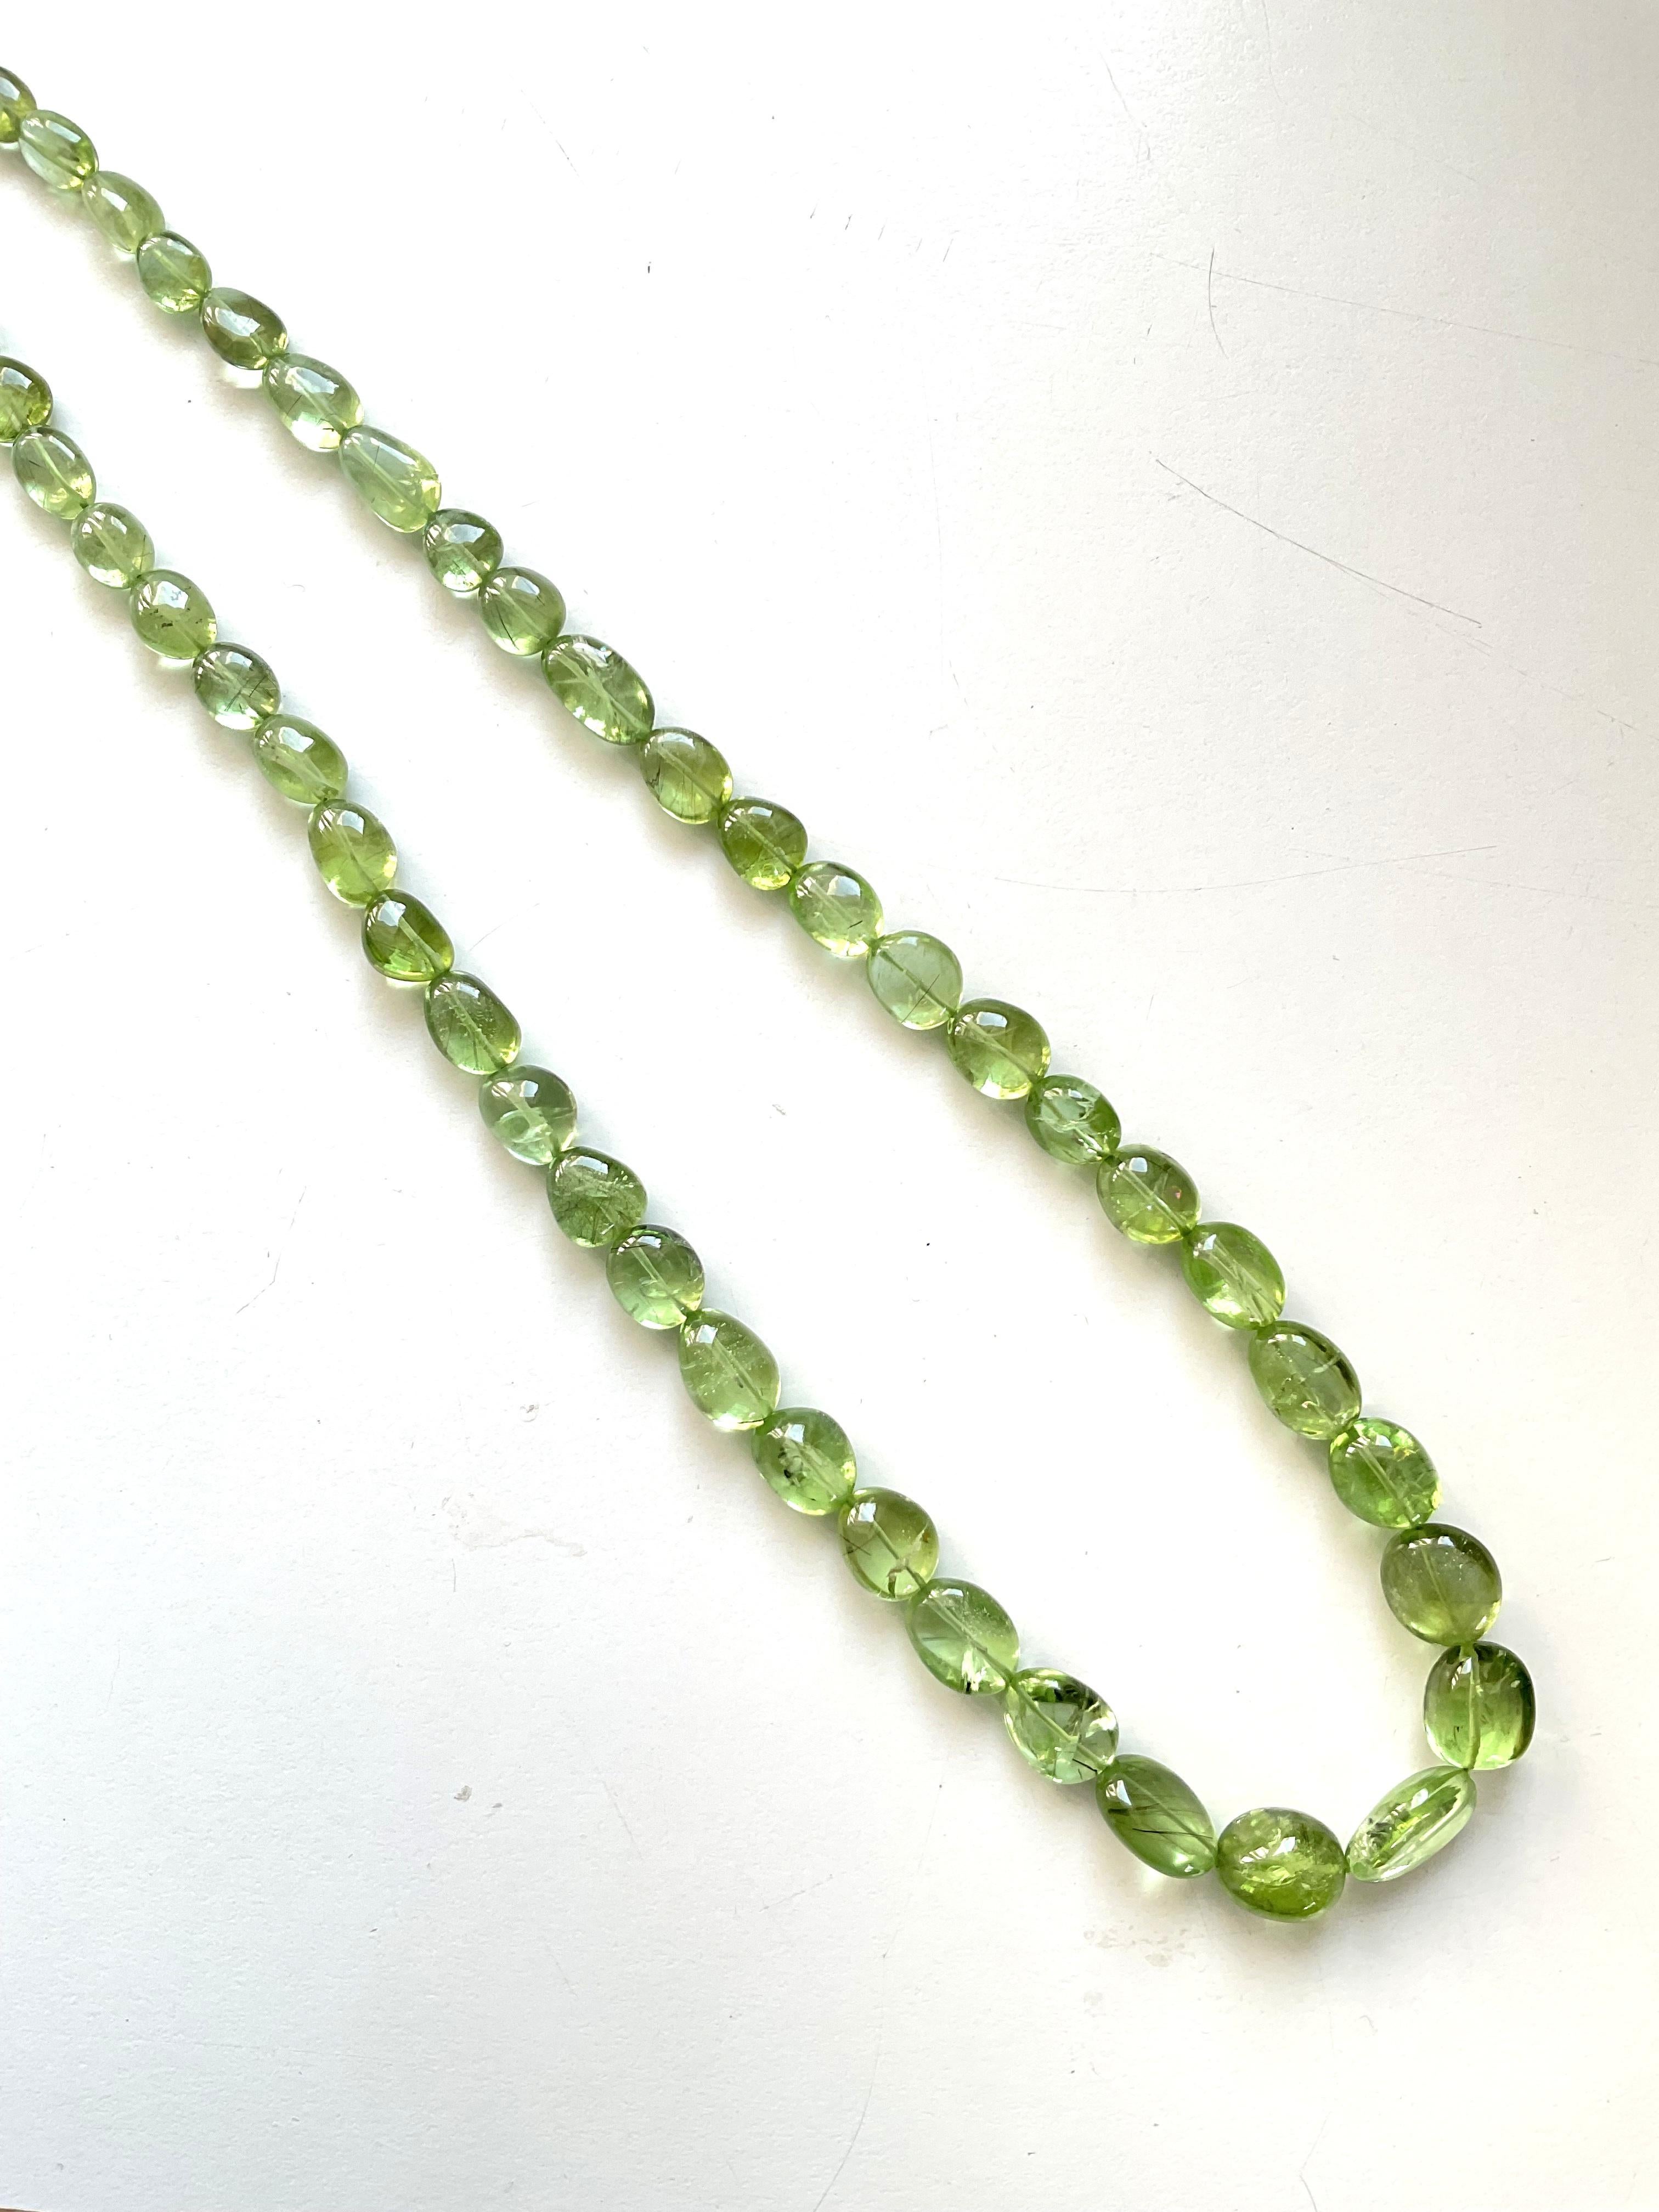 233.75 carats apple green peridot top quality plain tumbled natural necklace gem

Gemstone - Peridot
Size : 5x6 to 11x14
Weight : 233.75 Carats
Strand - 1 Line